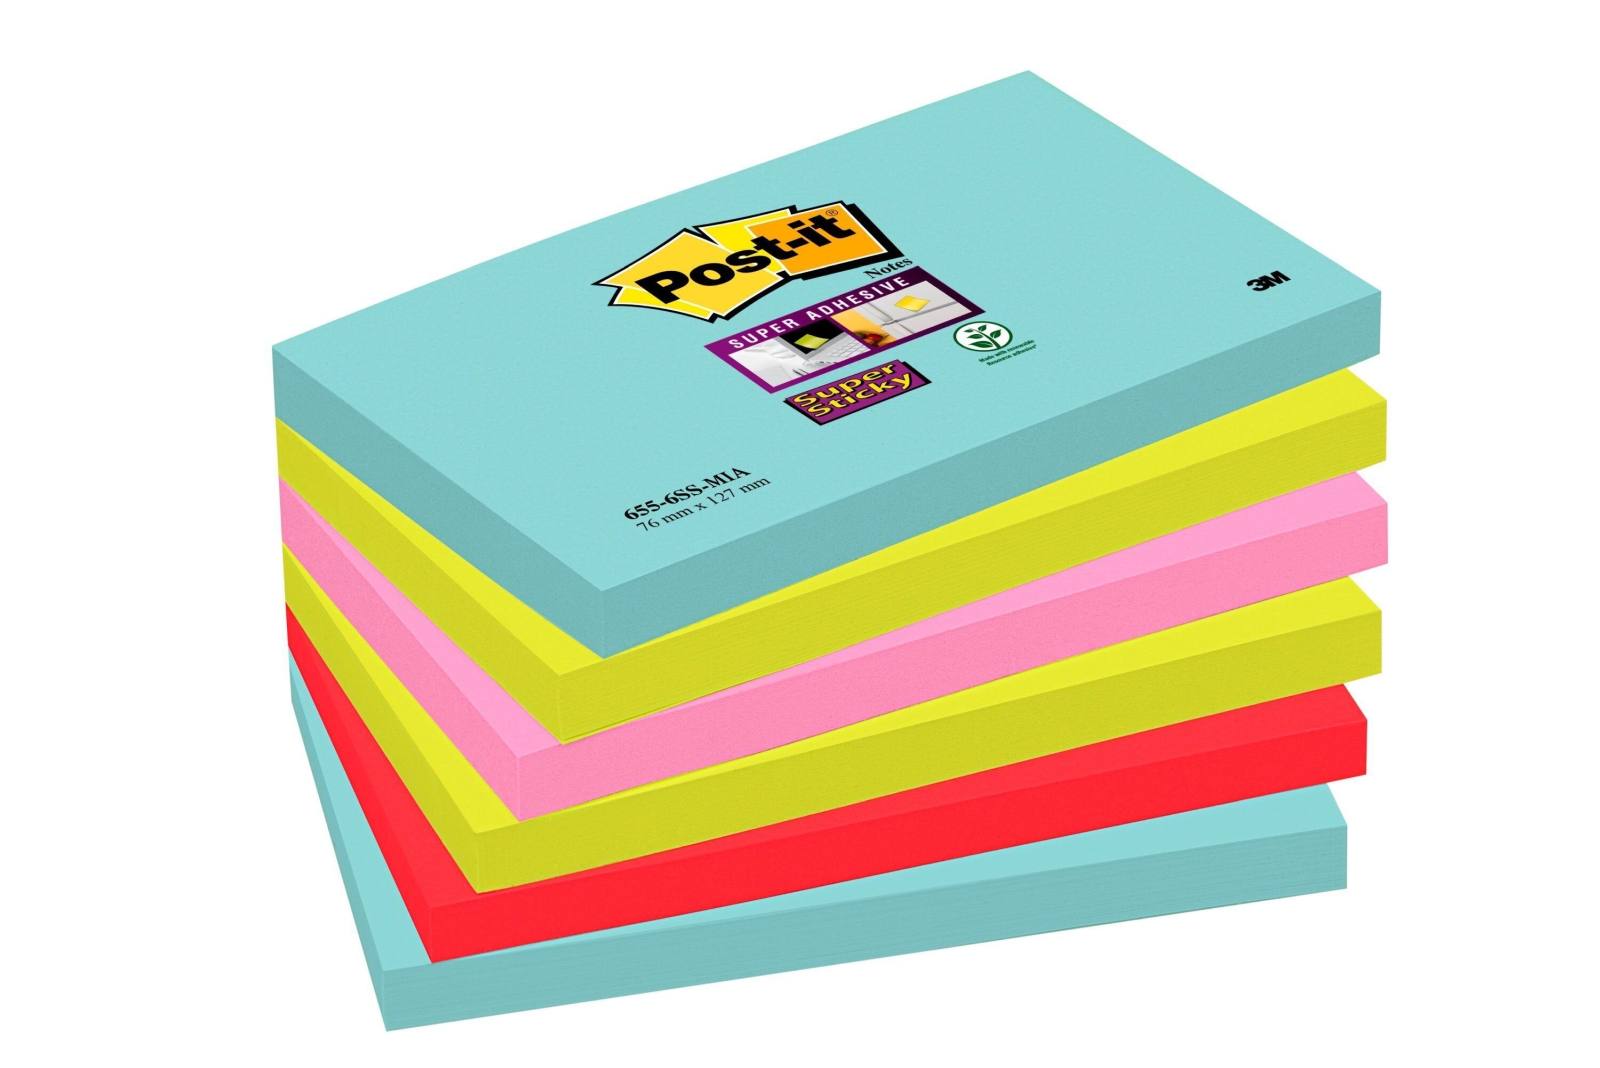 3M Post-it Super Sticky Notes 6556SMI, 127 mm x 76 mm, turquoise, neon green, neon pink, poppy red, 6 pads of 90 sheets each